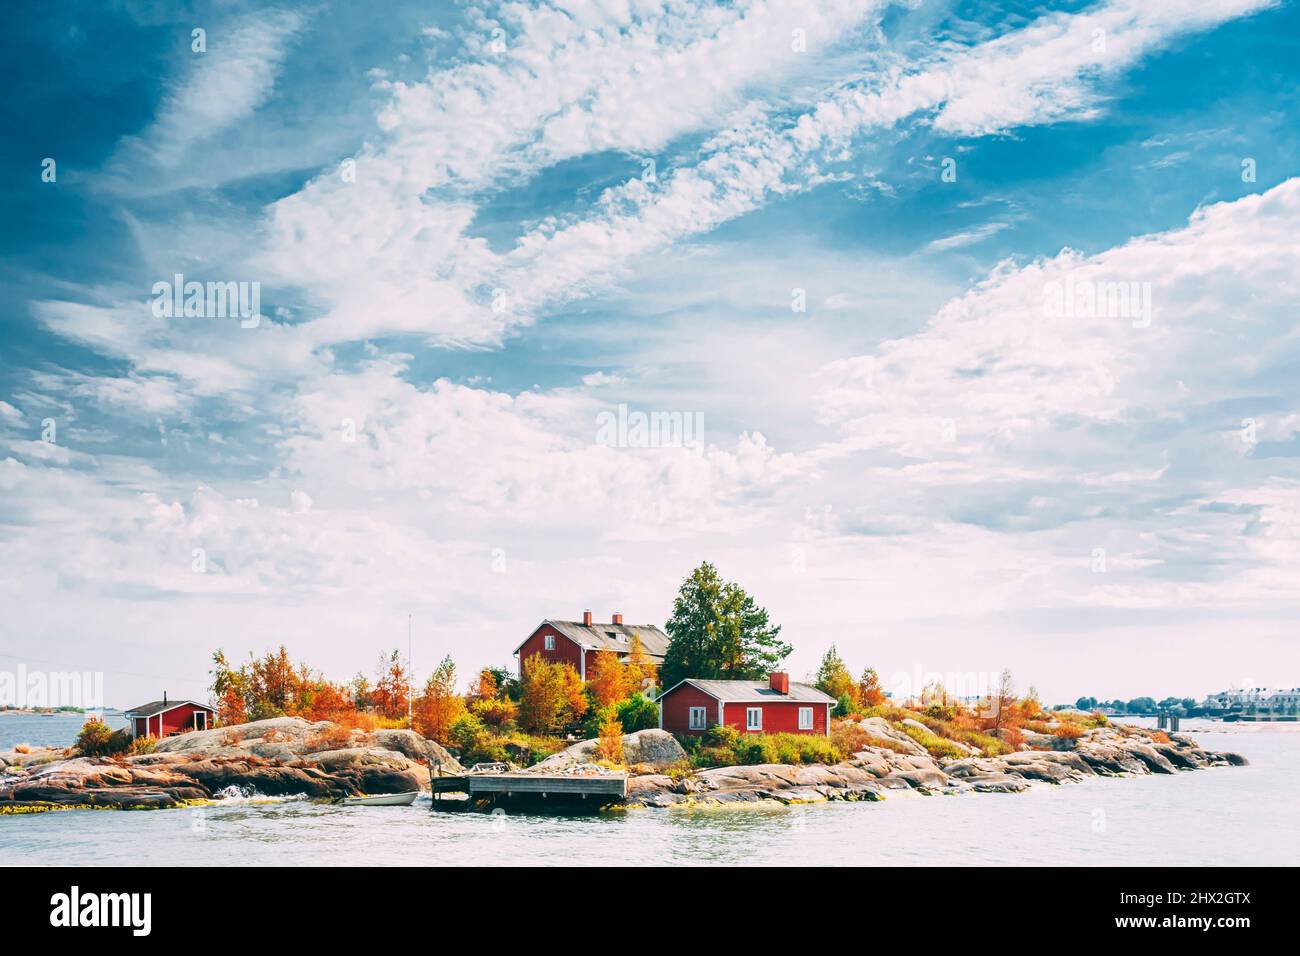 Suomi Or Finland. Beautiful Red Finnish Wooden Log Cabin House On Rocky Island Coast In Summer Sunny Evening. Lake Or River Landscape. Tiny Rocky Stock Photo